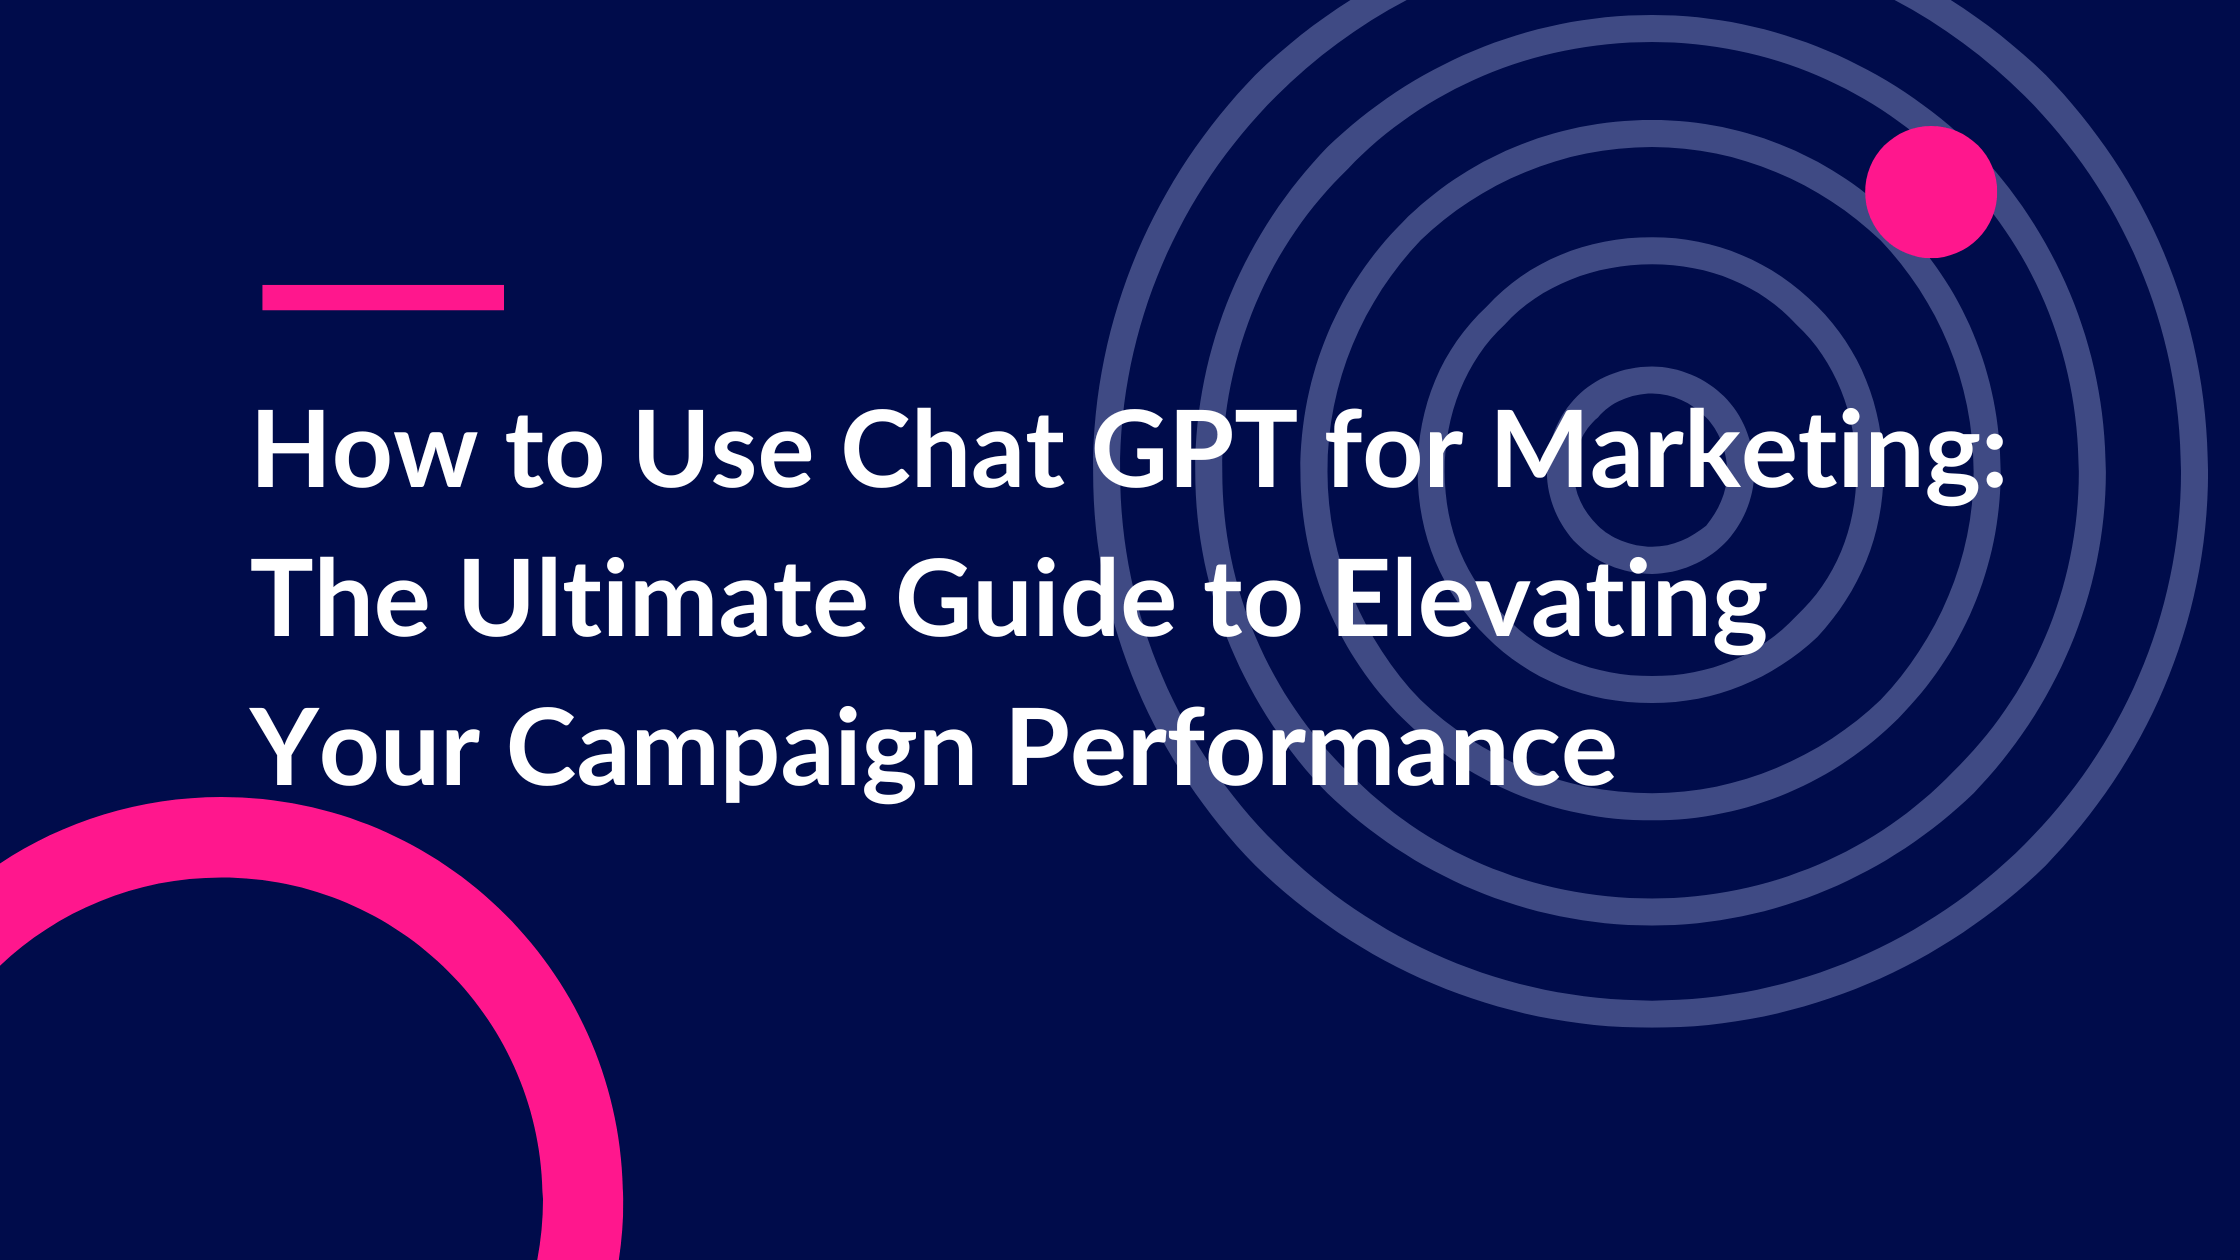 Chat GPT for Marketing: The Ultimate Guide to Elevating Your Campaign Performance